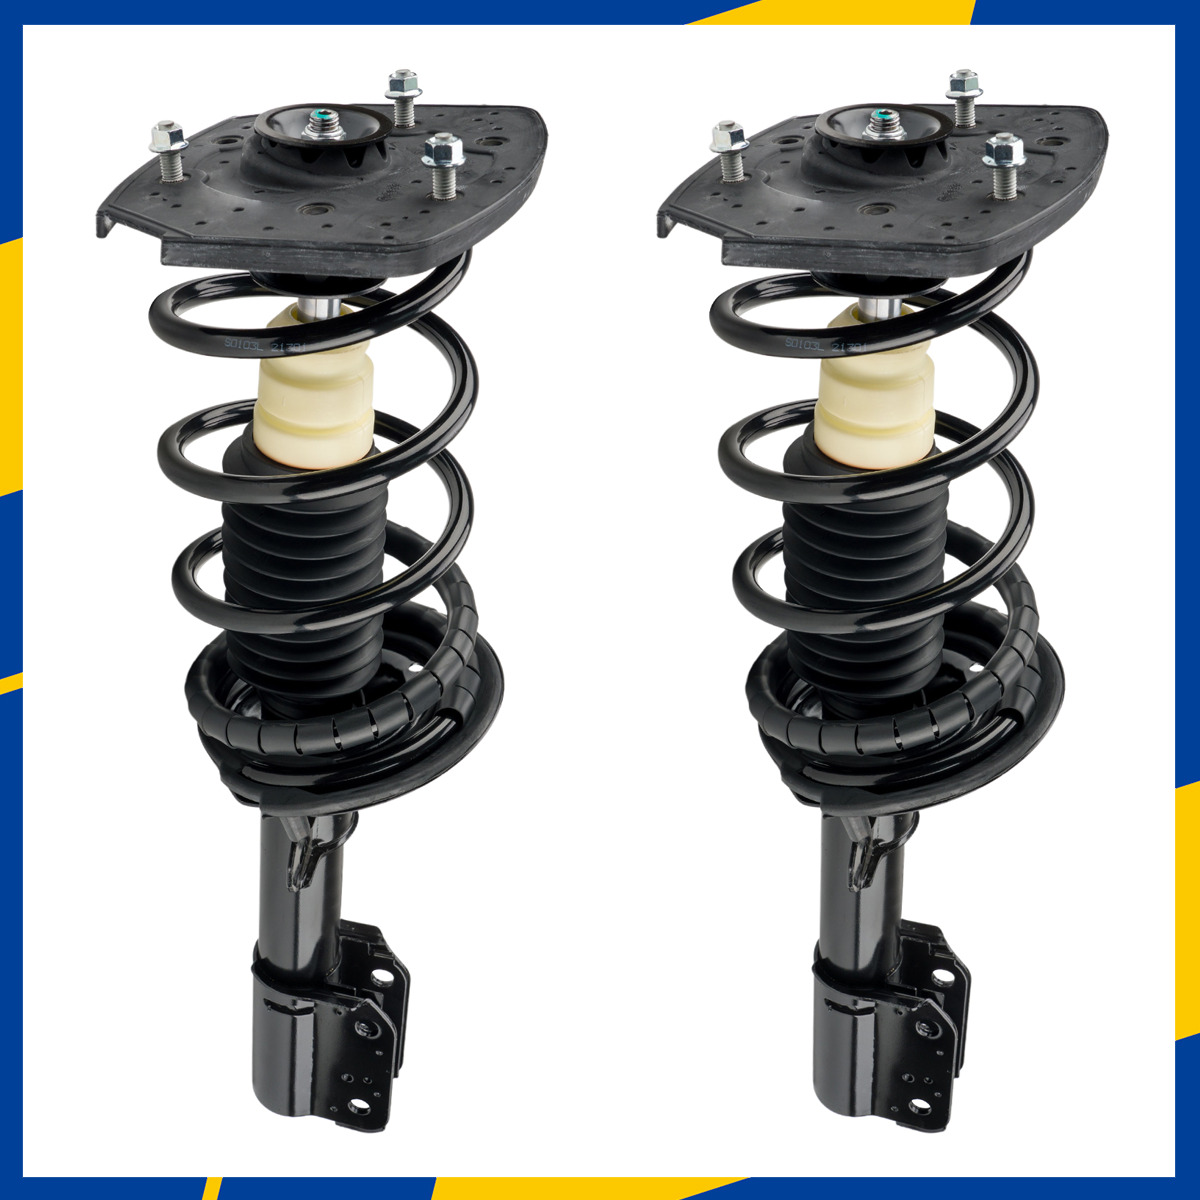 2x Complete Rear Struts & Coil Springs w/ Mounts for 2000-2011 Chevrolet Impala